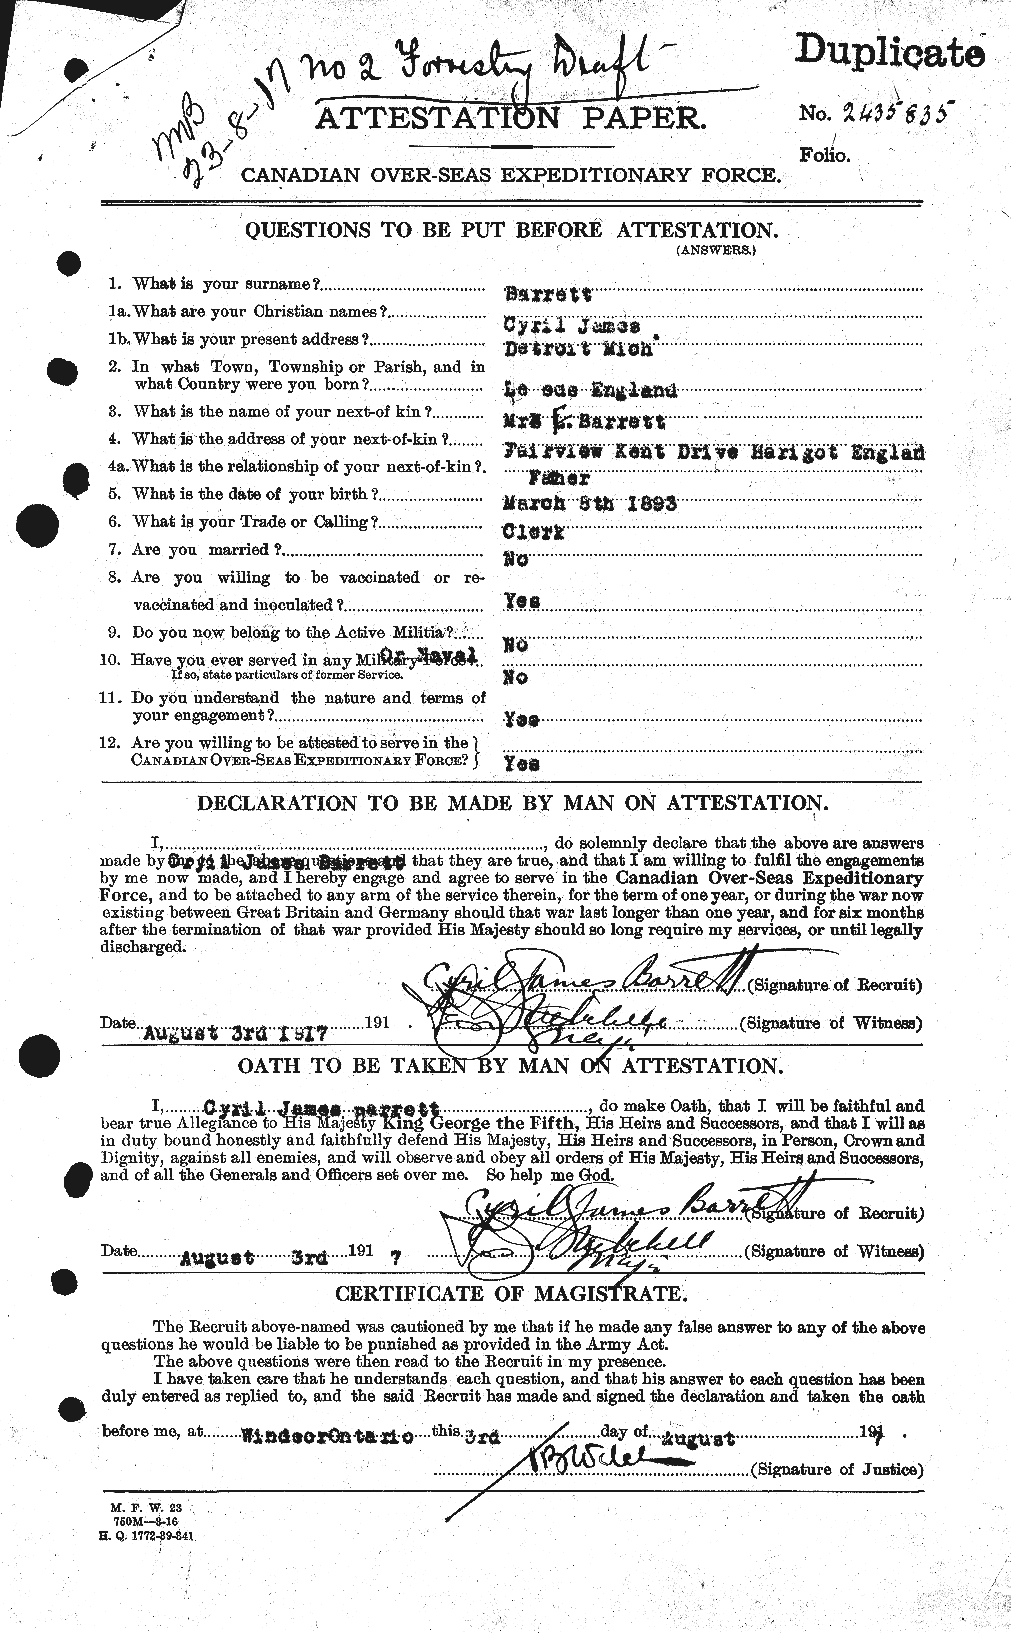 Personnel Records of the First World War - CEF 220366a